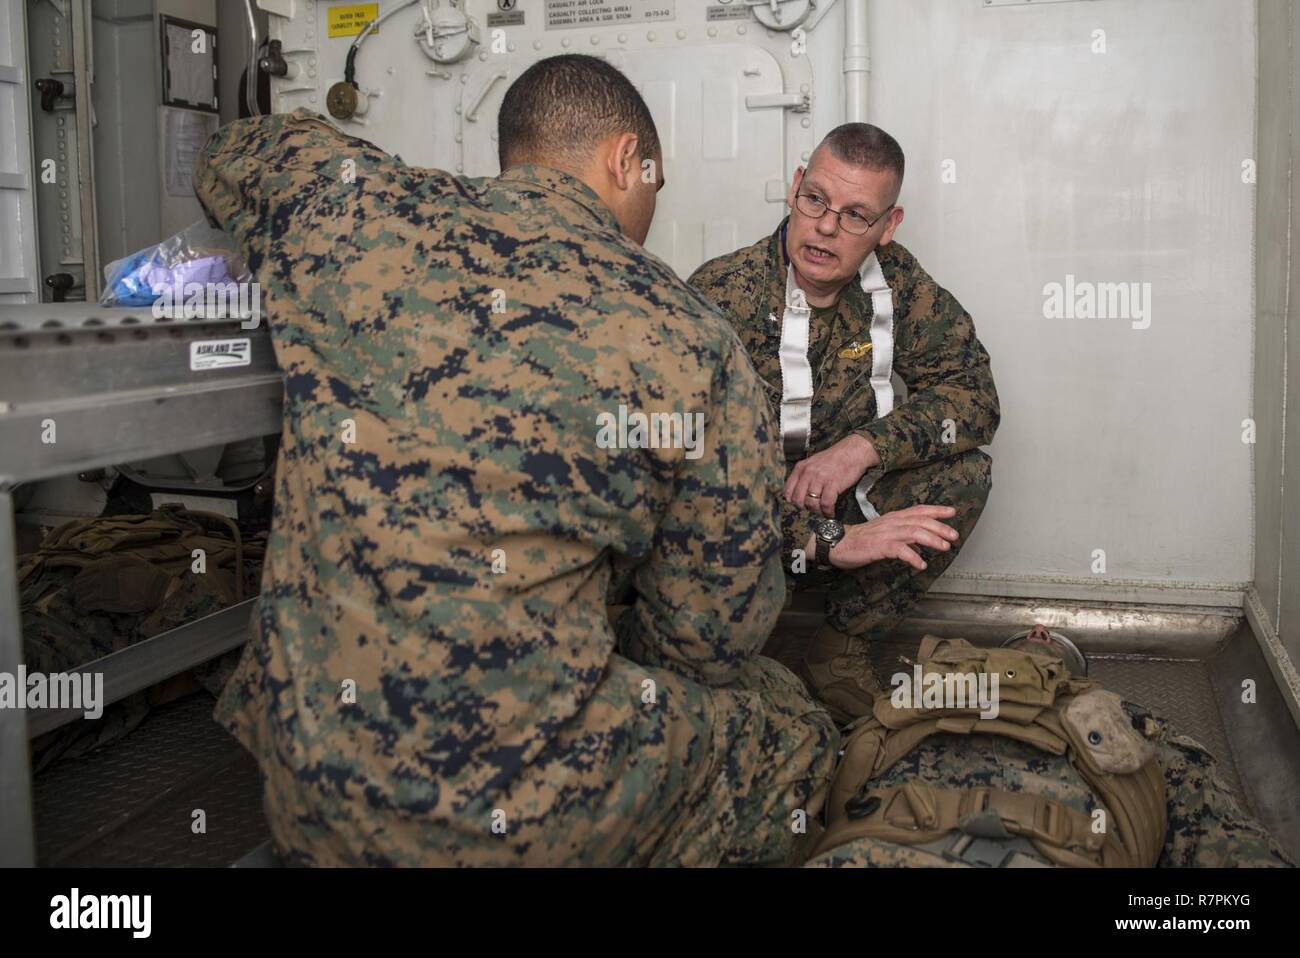 PHILIPPINE SEA (March 27, 2017) Cmdr. William Riley, the command chaplain assigned to the 31st Marine Expeditionary Unit (MEU), from Myerstown, Pa., trains Religious Programs Specialist Seaman Anthony Woodcasella, from Norwell, Mass., on the proper procedure to administer rites during a certification exercise (CERTEX) mass casualty drill aboard the amphibious assault ship USS Bonhomme Richard (LHD 6). A mass casualty drill is an exercise conducted to ensure medical responders can quickly and efficiently provide treatment to injured personnel. Bonhomme Richard, flagship of the Bonhomme Richard  Stock Photo